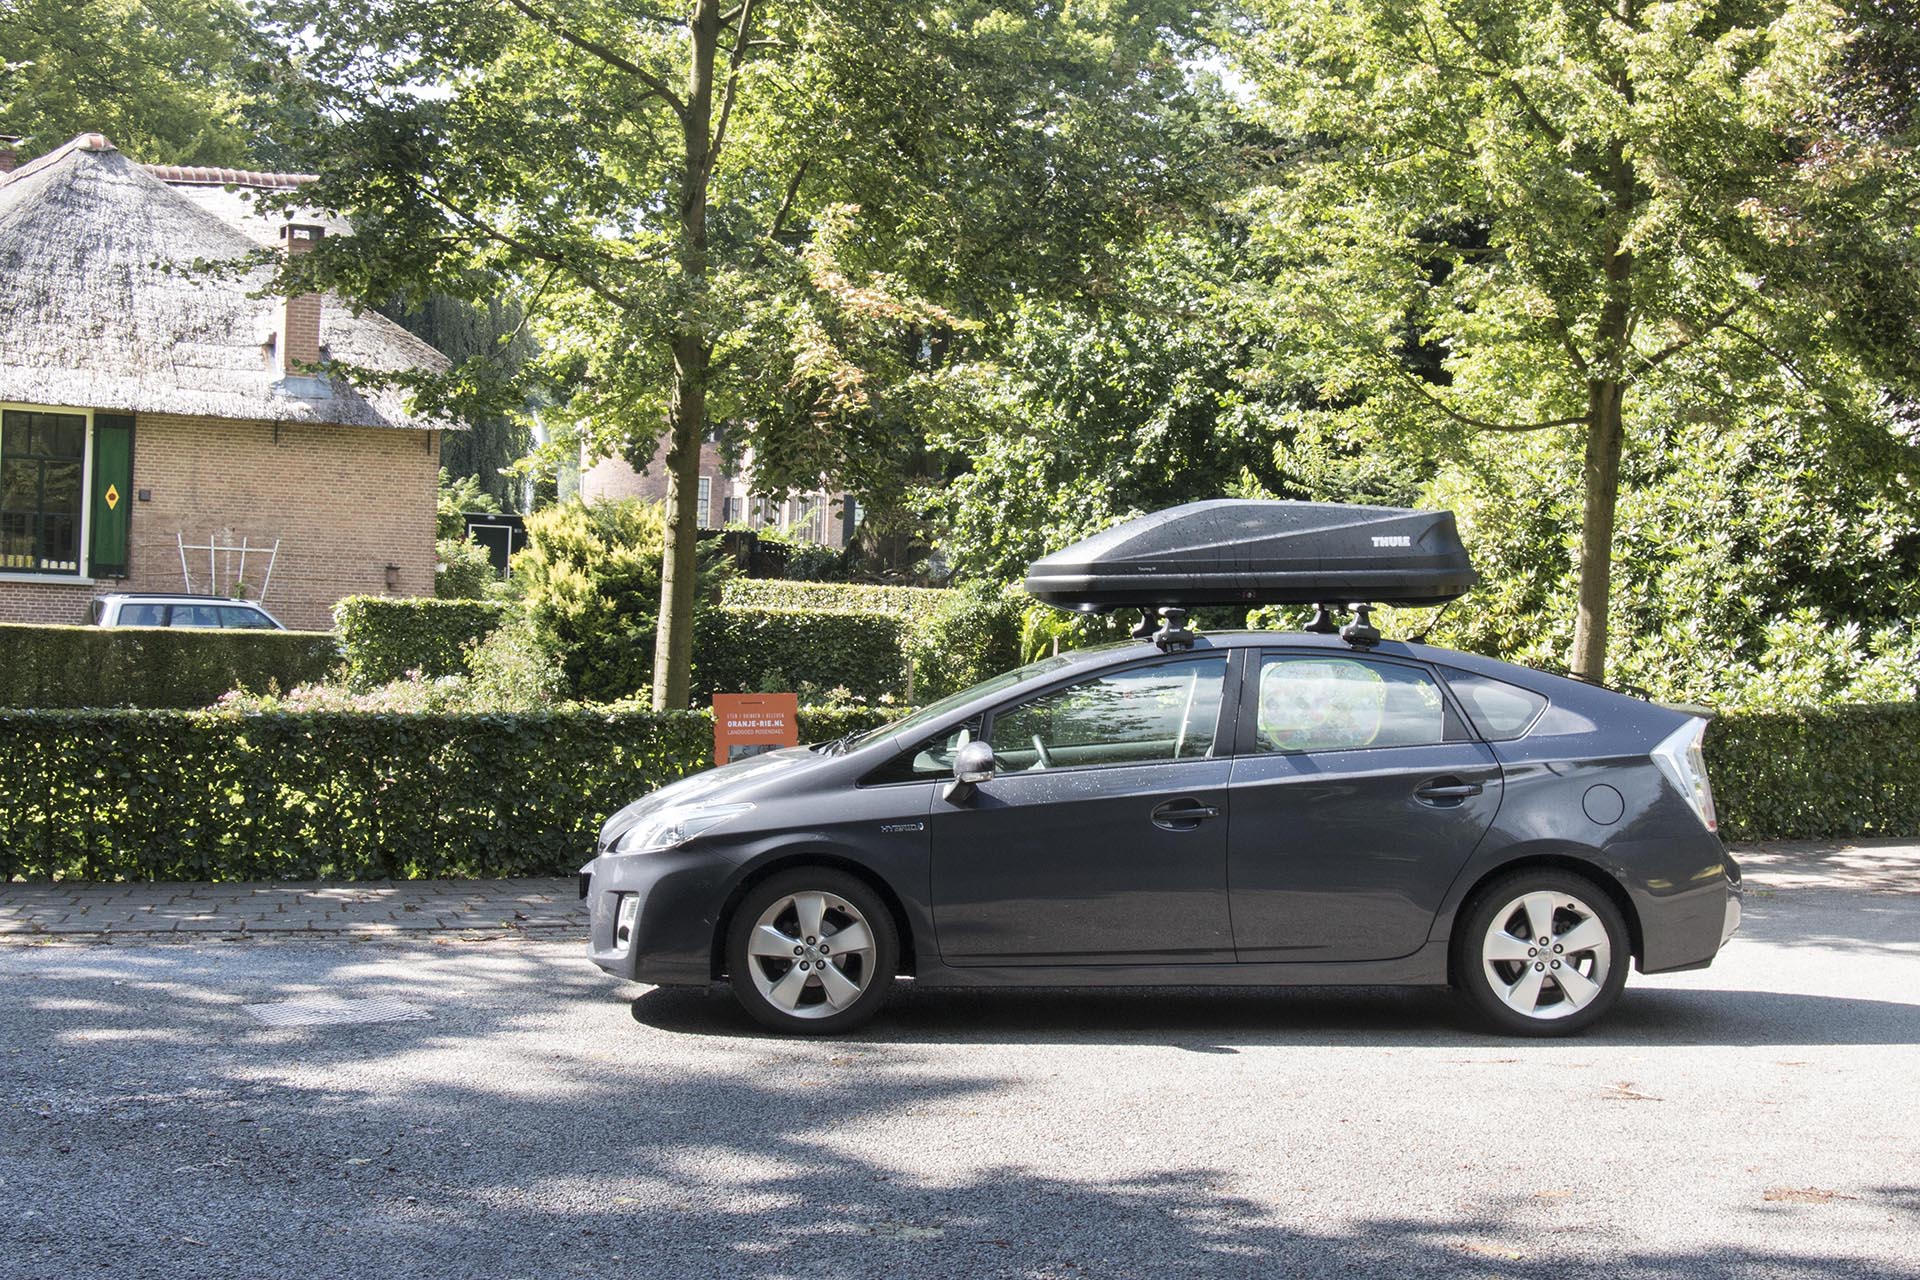 Review: Thule Touring M (Dakkoffer) -